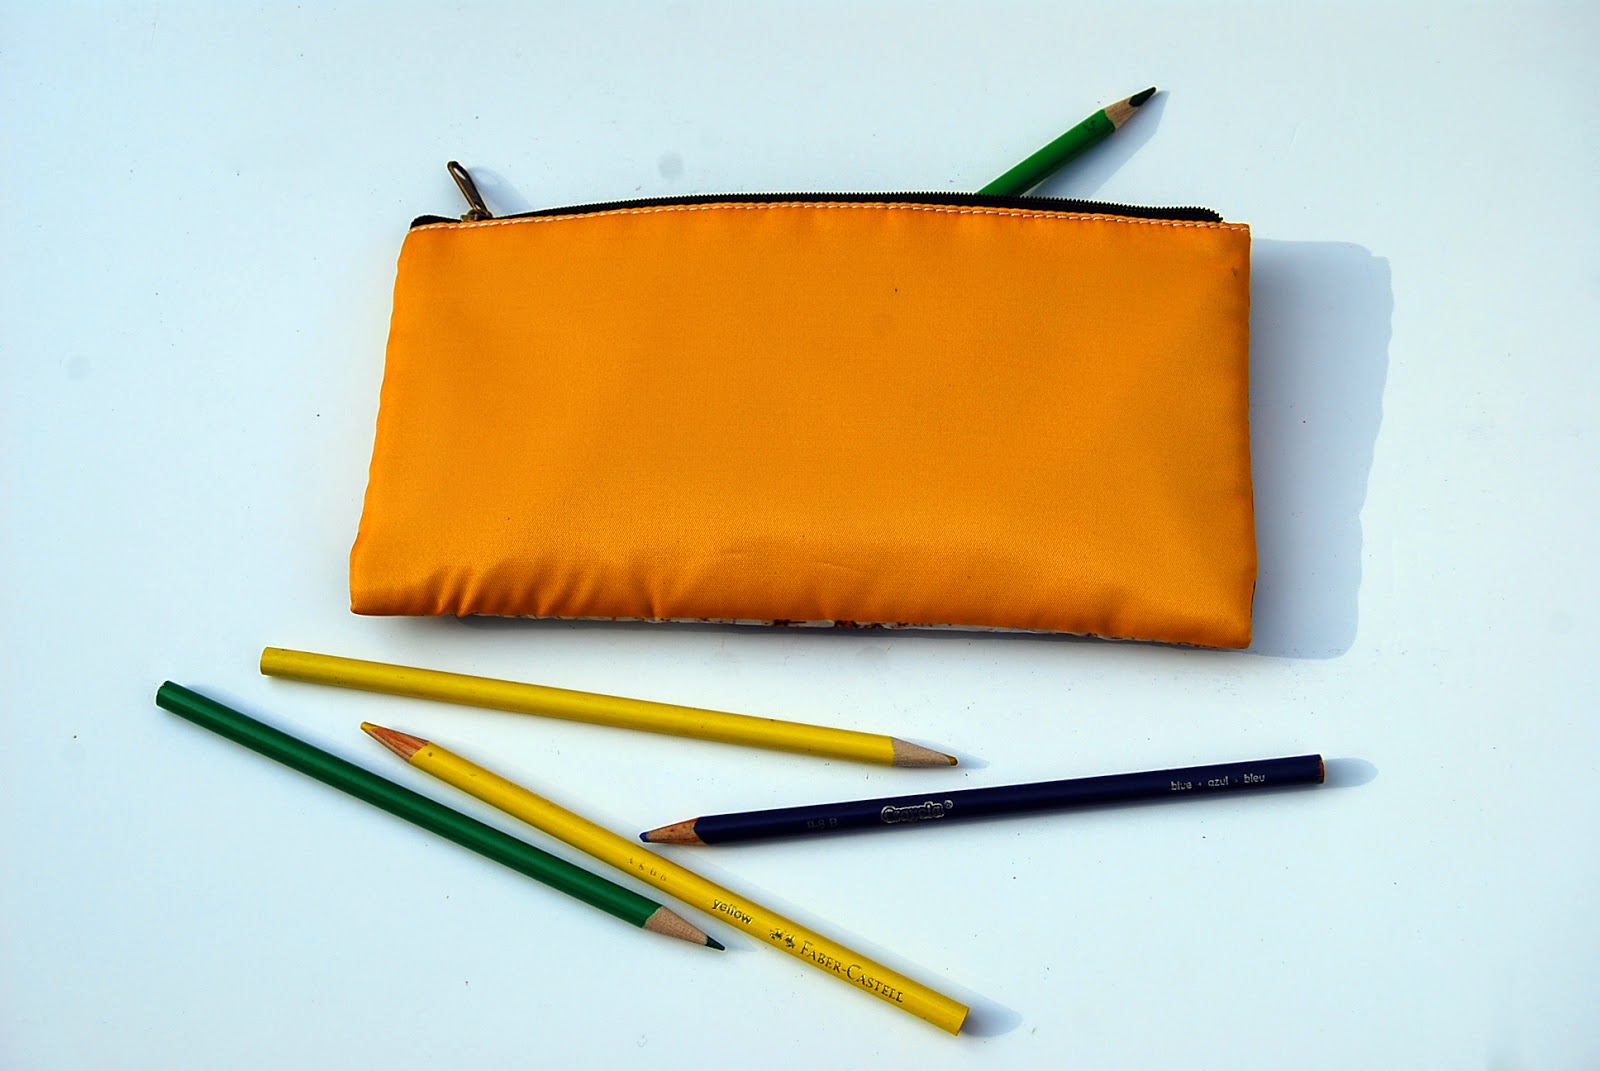 cute pencil cases | cool pencil cases discover more https://www.etsy.com/shop/SchulmanArts/search?search_query=pencil+cases&order=date_desc&view_type=gallery&ref=shop_search